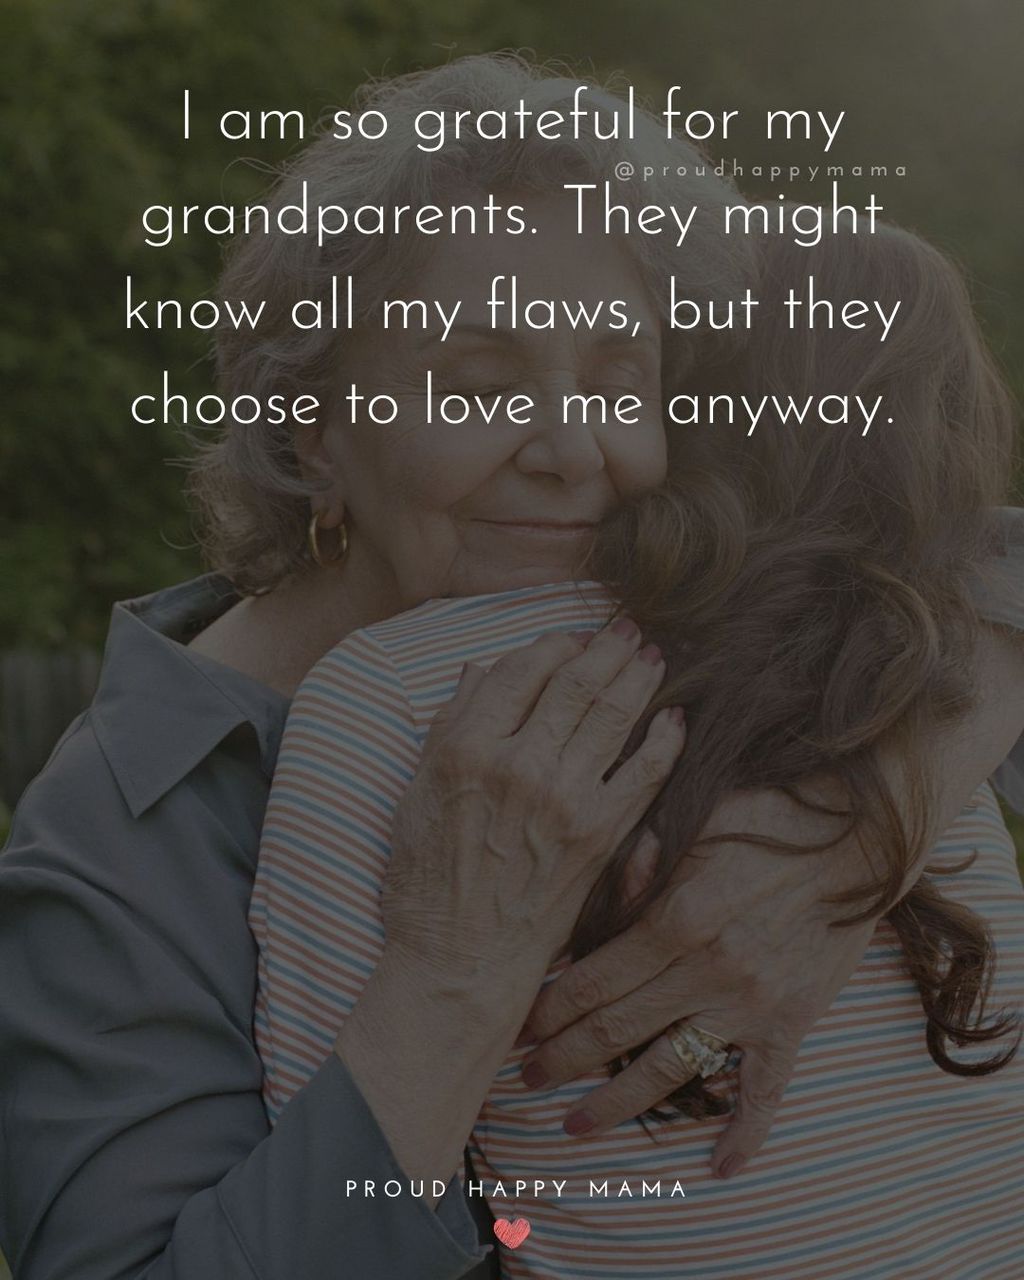 Grandparents Quotes And Poems | I am so grateful for my grandparents. They might know all my flaws, but they choose to love me anyway.